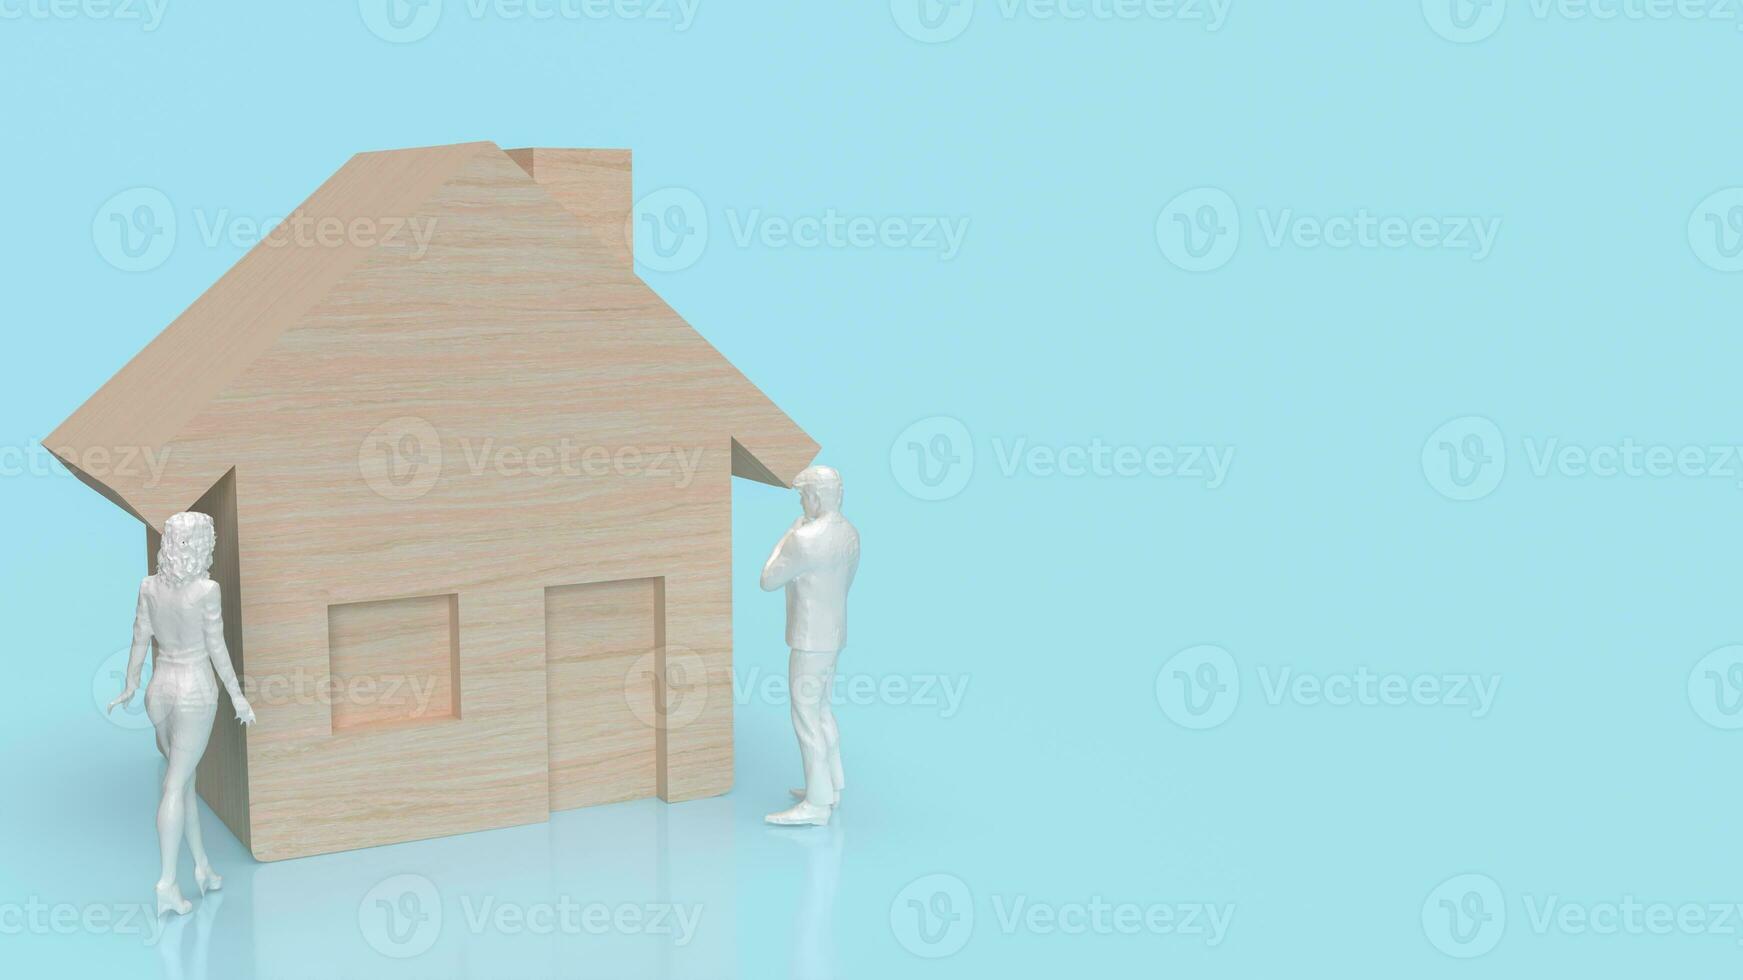 The home wood and figure on blue background for property or estate concept 3d rendering photo